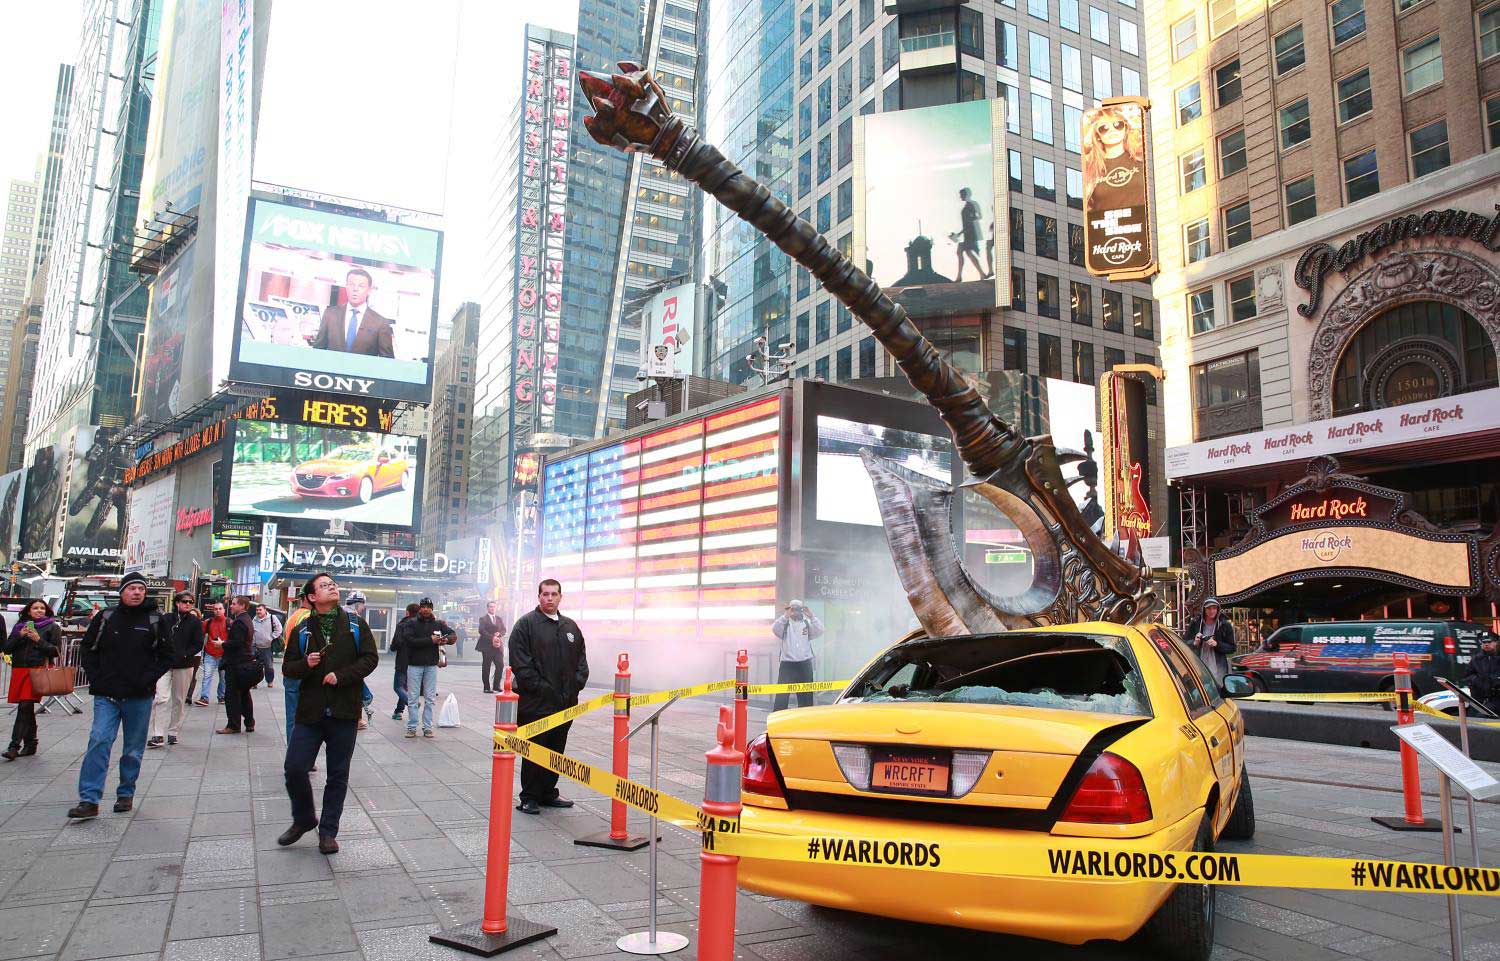 Image for Warlords of Draenor launch inspires cool Times Square installation